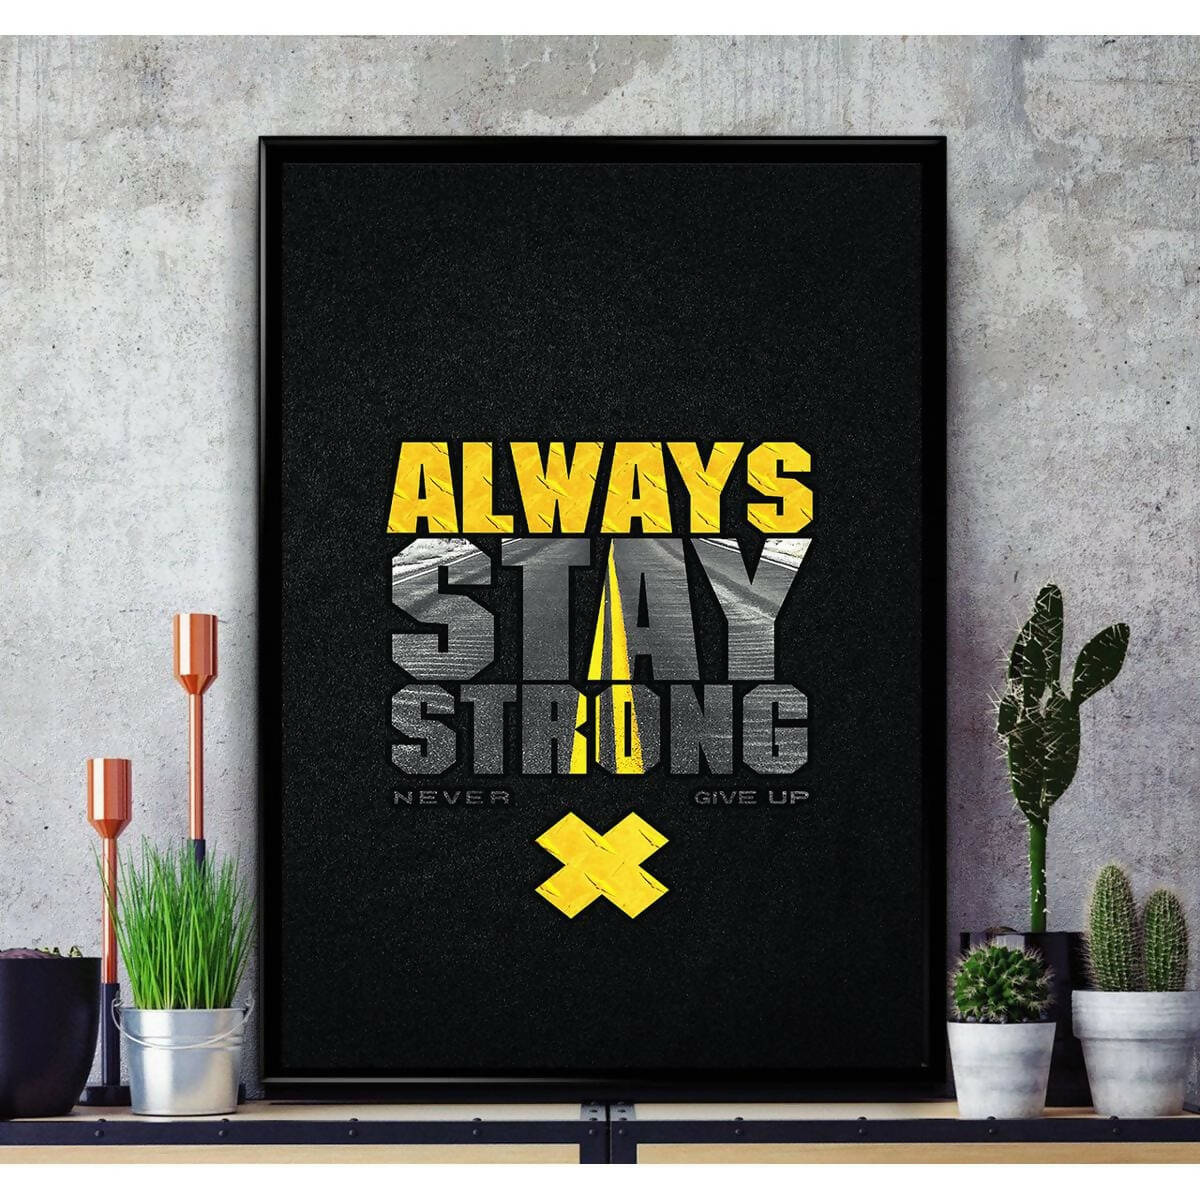 Always Stay Strong Poster Wall Hanging Glass Photo Frame in Premium Glossy Photo Paper A4 8x12” size for Home Decor and Decoration Accessories